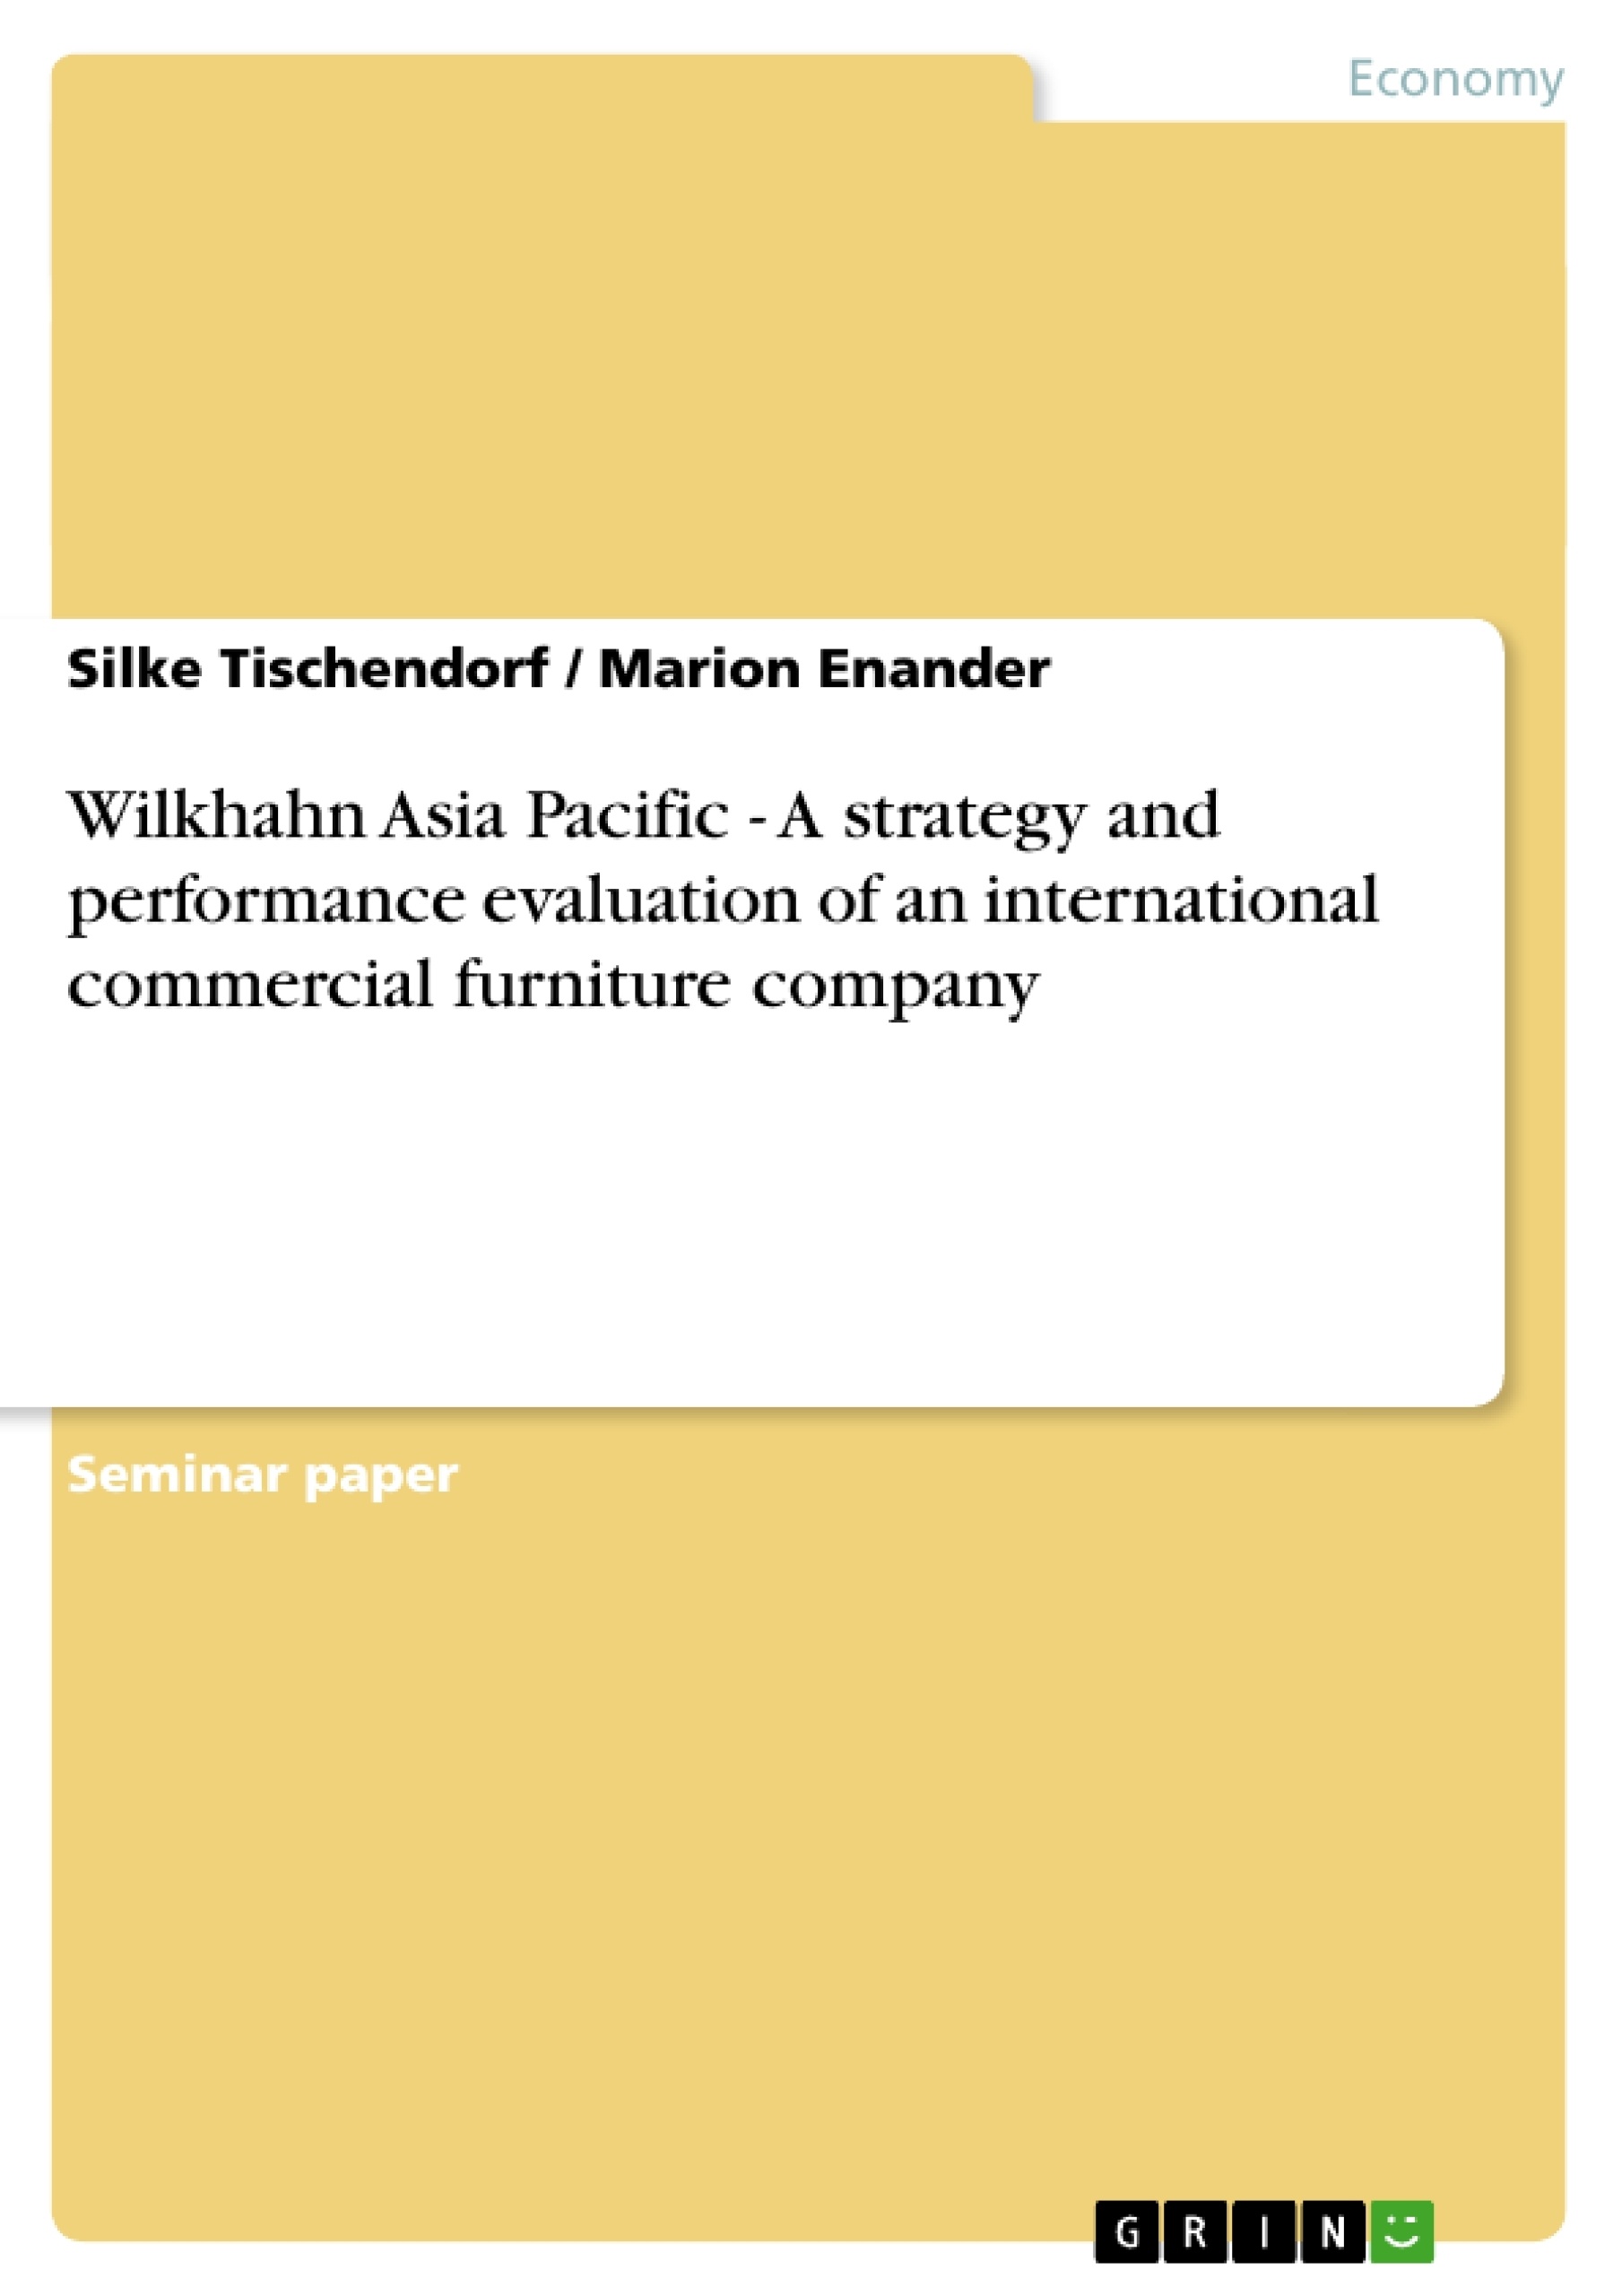 Titel: Wilkhahn Asia Pacific - A strategy and performance evaluation of an international commercial furniture company